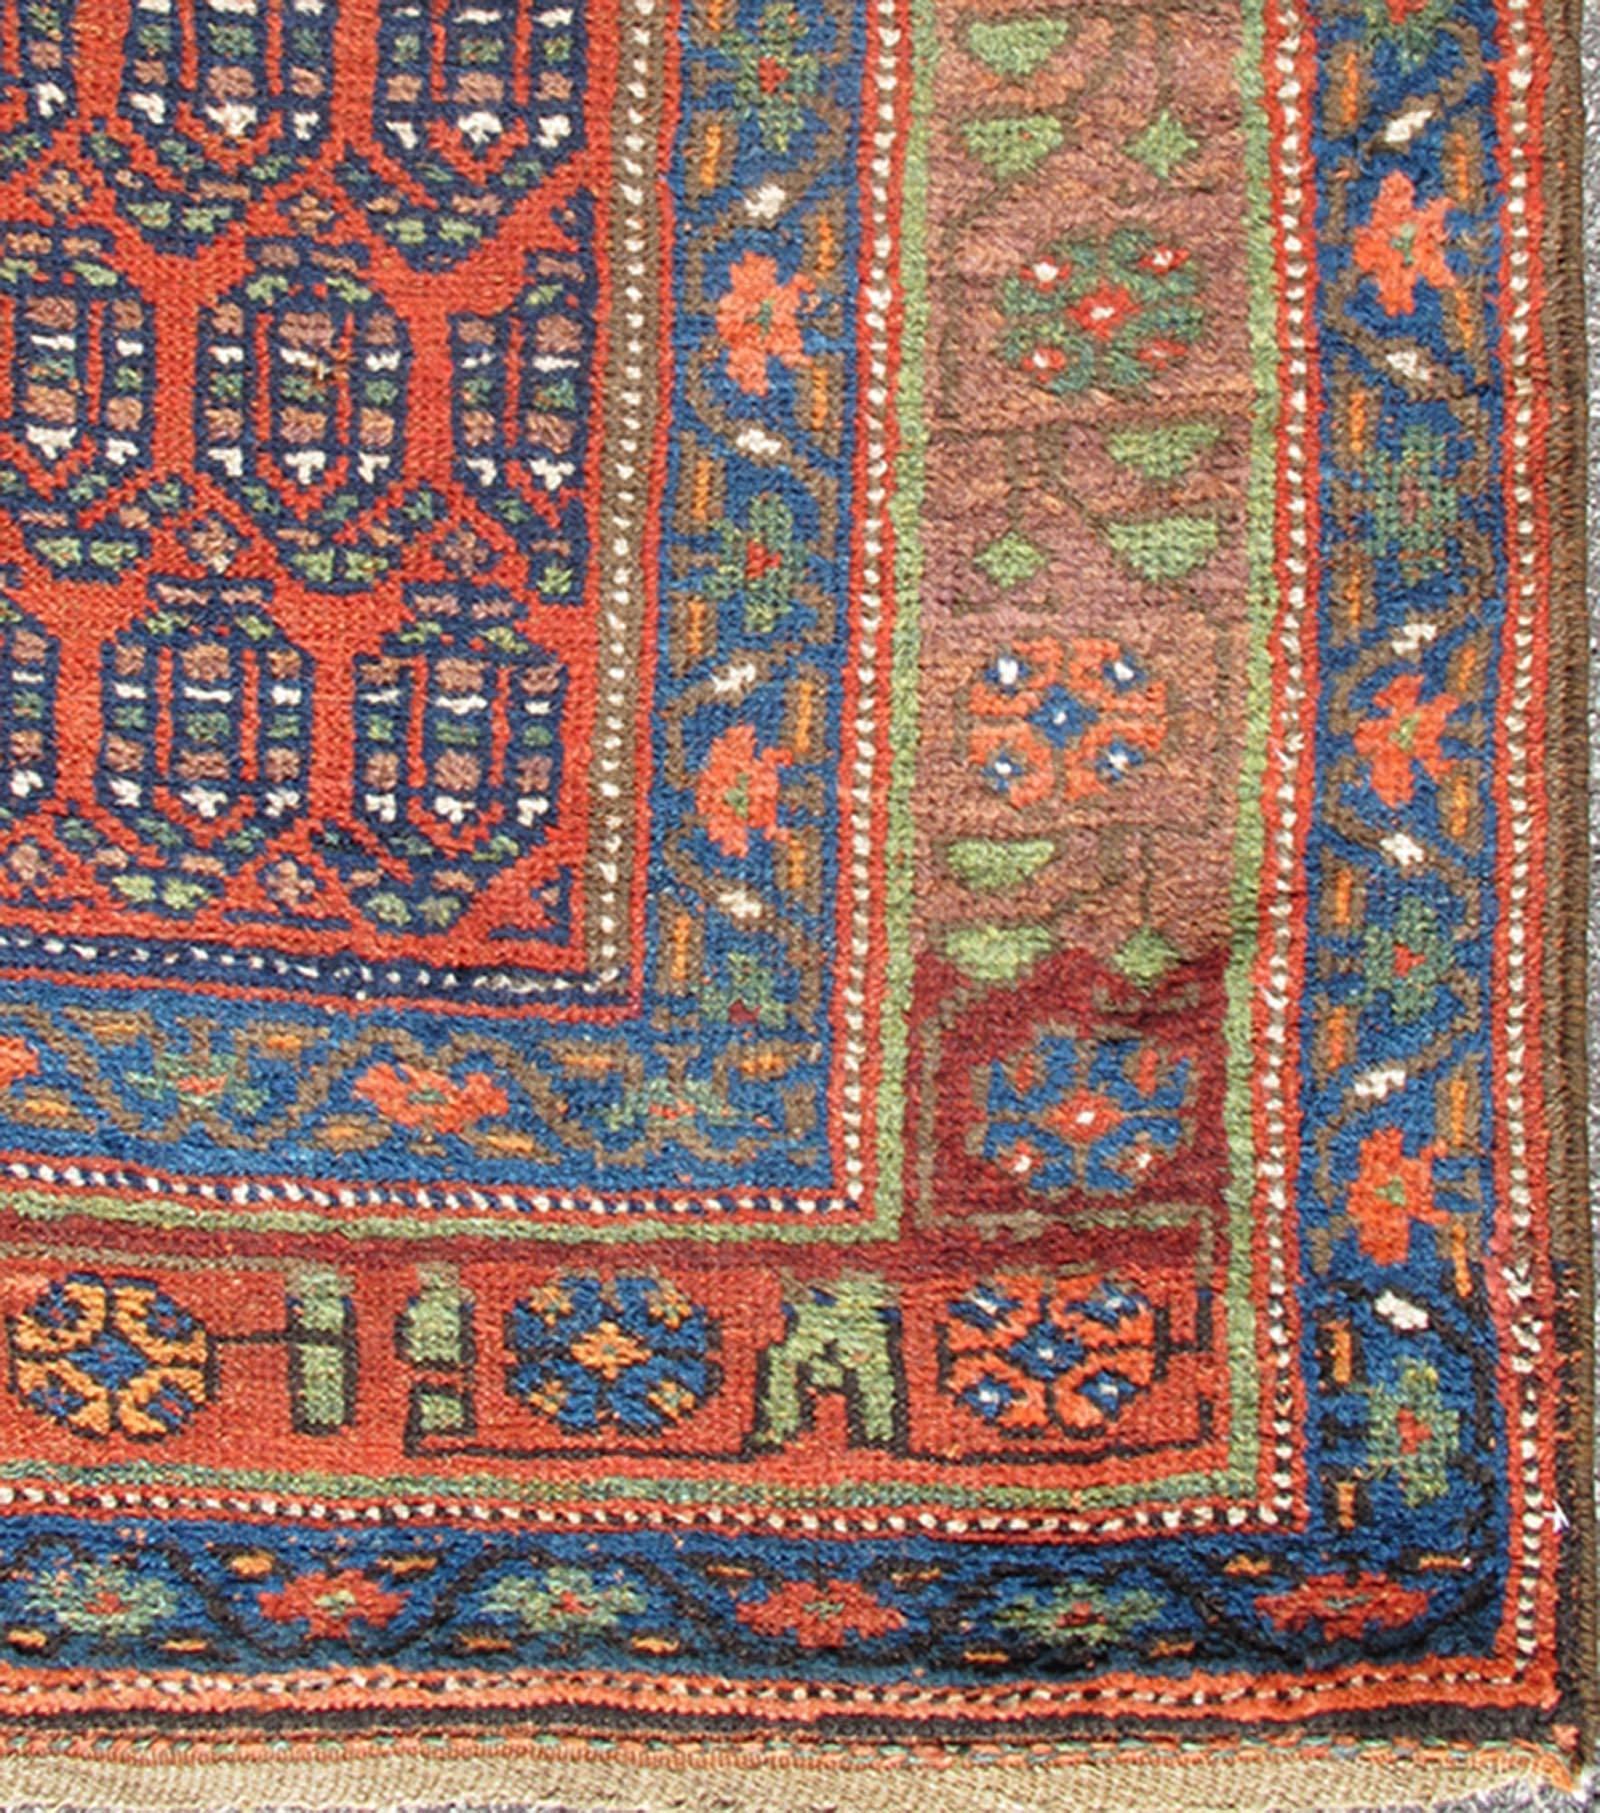 Long Persian Bidjar Kurdish Runner with small Paisley Design in Red, Blue, Brown, 13-1108, Great Northwest Persian Bidjar Kurd runners are renowned for their superior use of color. This charming rug uses a full spectrum of vegetable dyes ranging